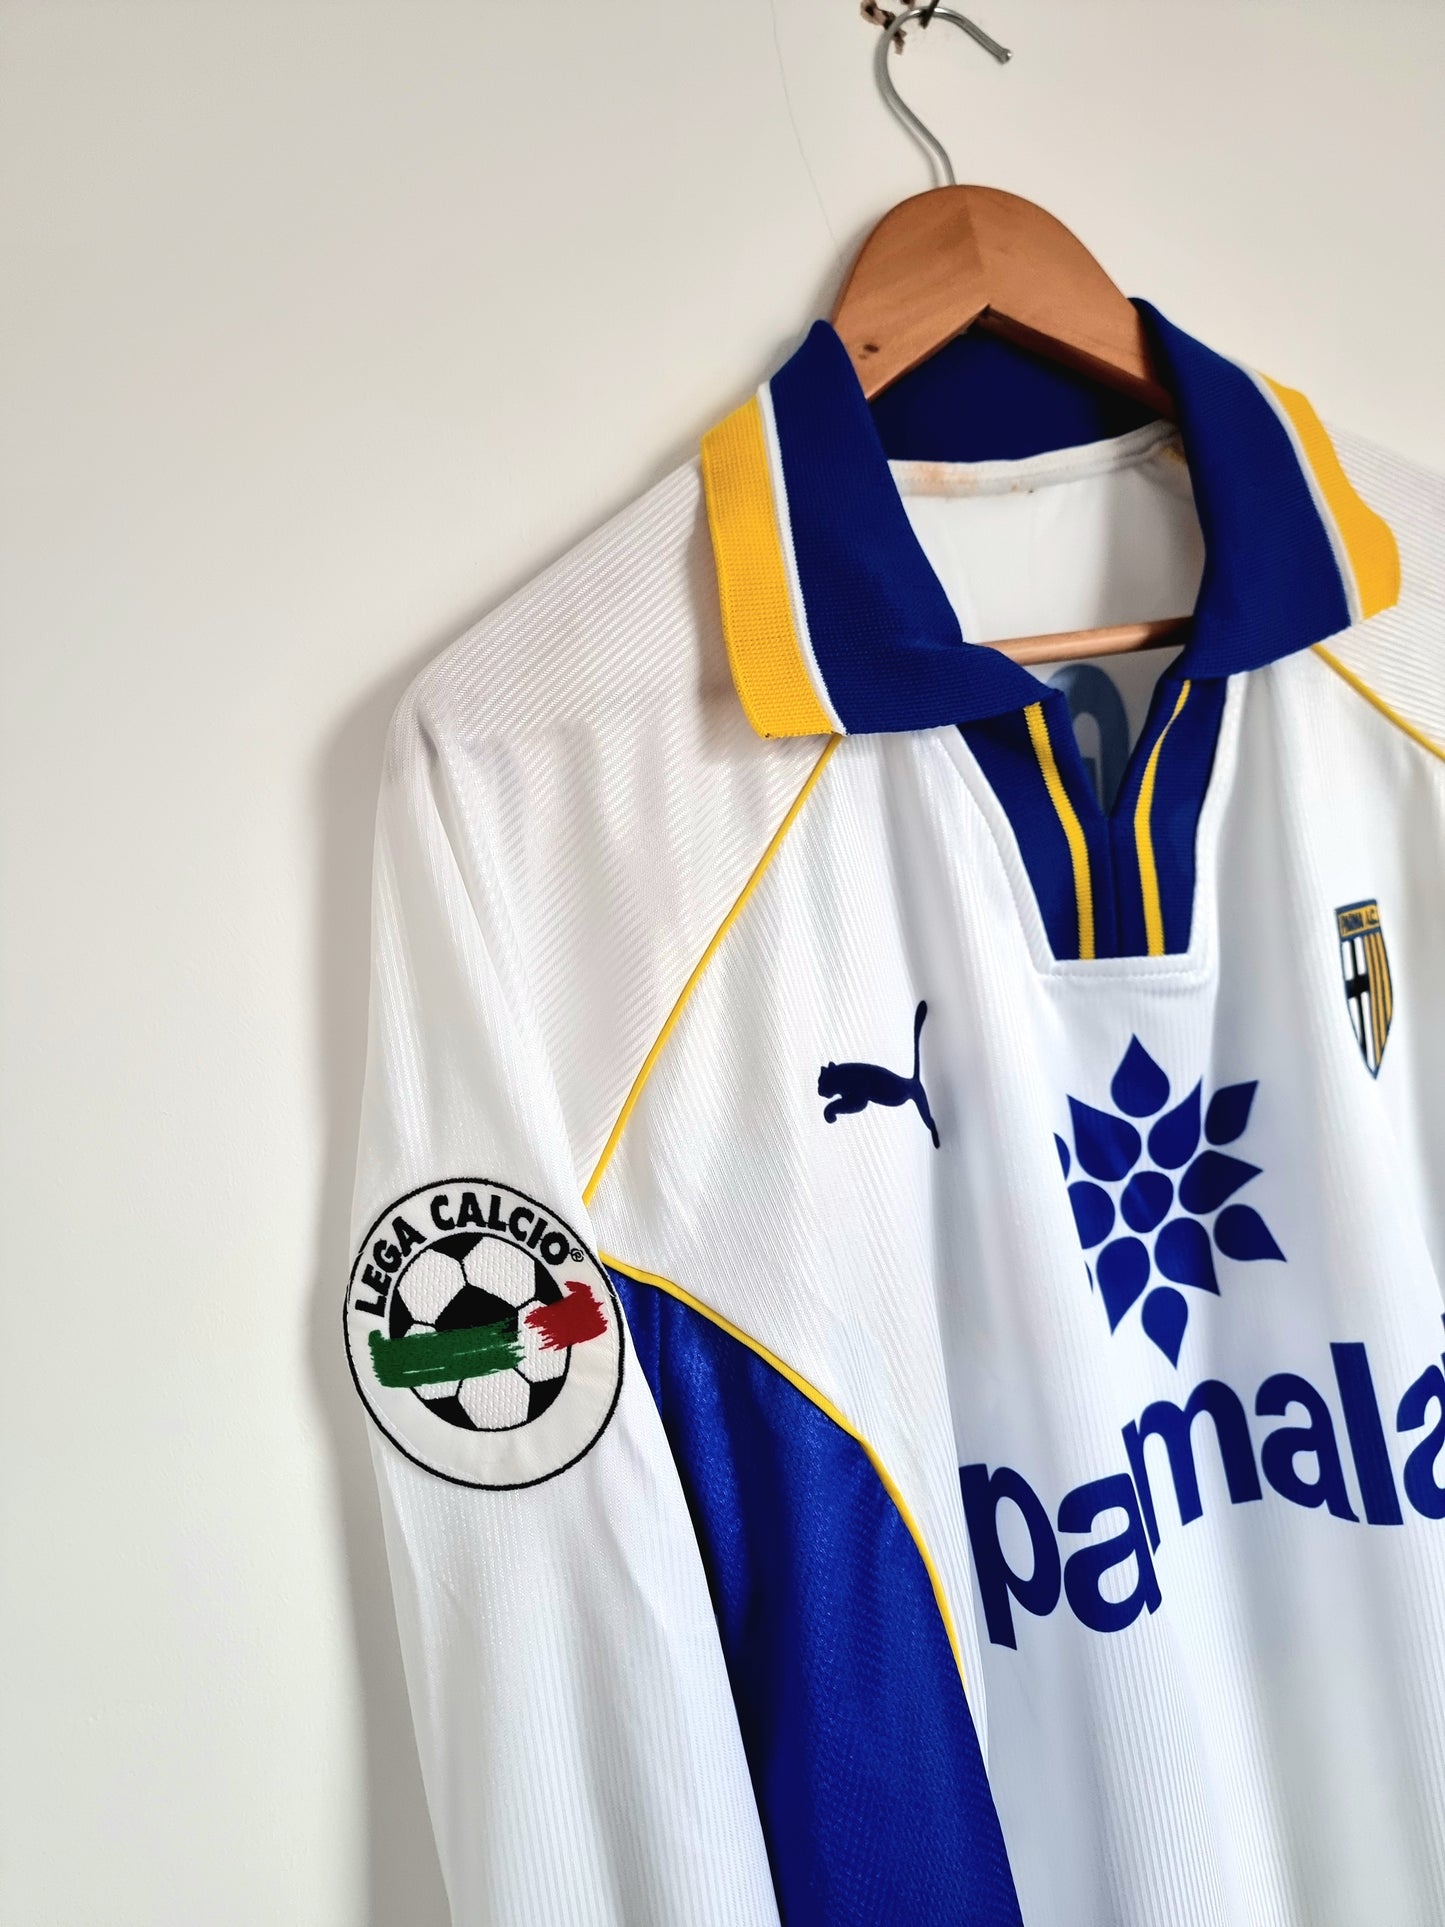 Puma Parma 97/98 'Stanic 13' Long Sleeve Match Issue Signed Home Shirt XL